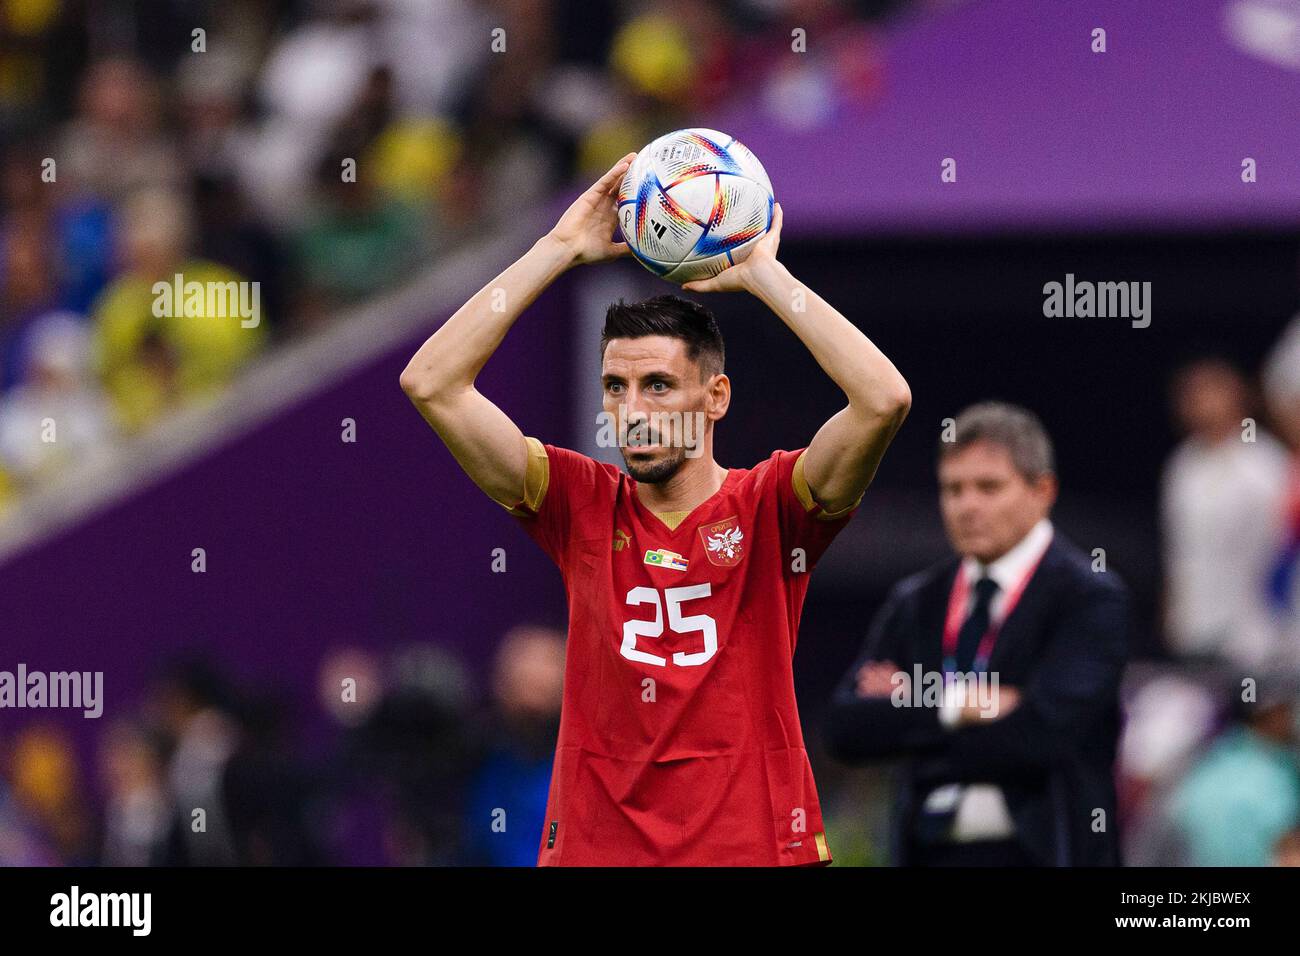 Lusail, Qatar. 24th Nov, 2022. Lusail, Qatar, Nov 25th 2022: Andrija Zivkovic of Serbia during a match between Brazil vs Serbia, valid for the group stage of the World Cup, held at the Lusail National Stadium in Lusail, Qatar. (Marcio Machado/SPP) Credit: SPP Sport Press Photo. /Alamy Live News Stock Photo